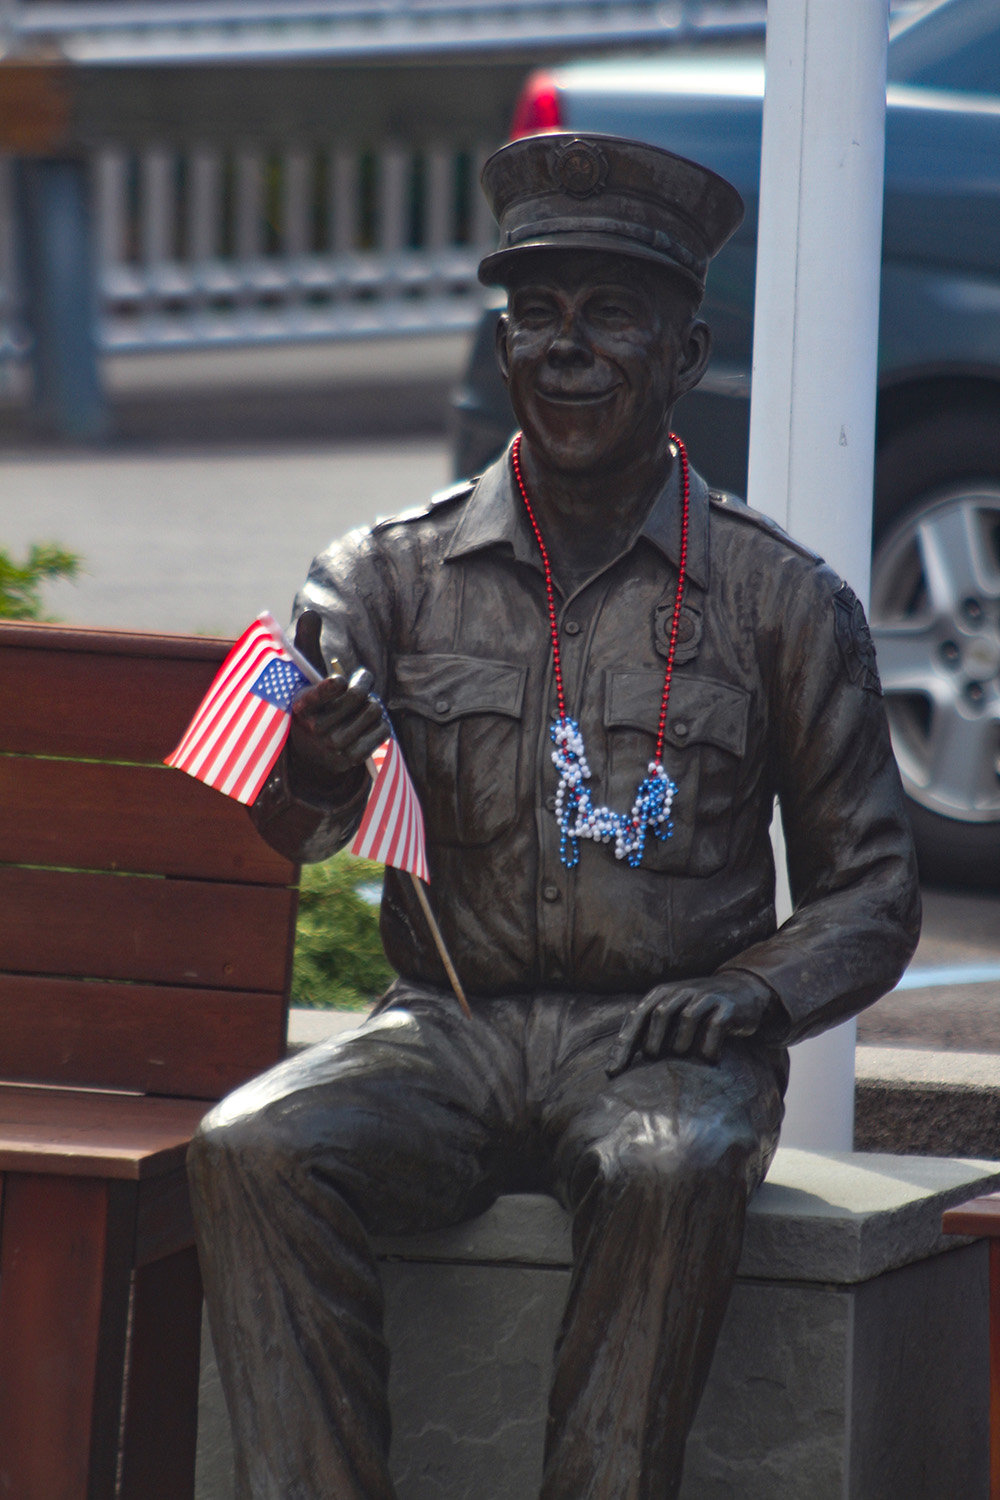 Twenthy-five years after he served as Grand Marshal, Richie Reynolds still smiles over Montgomery.